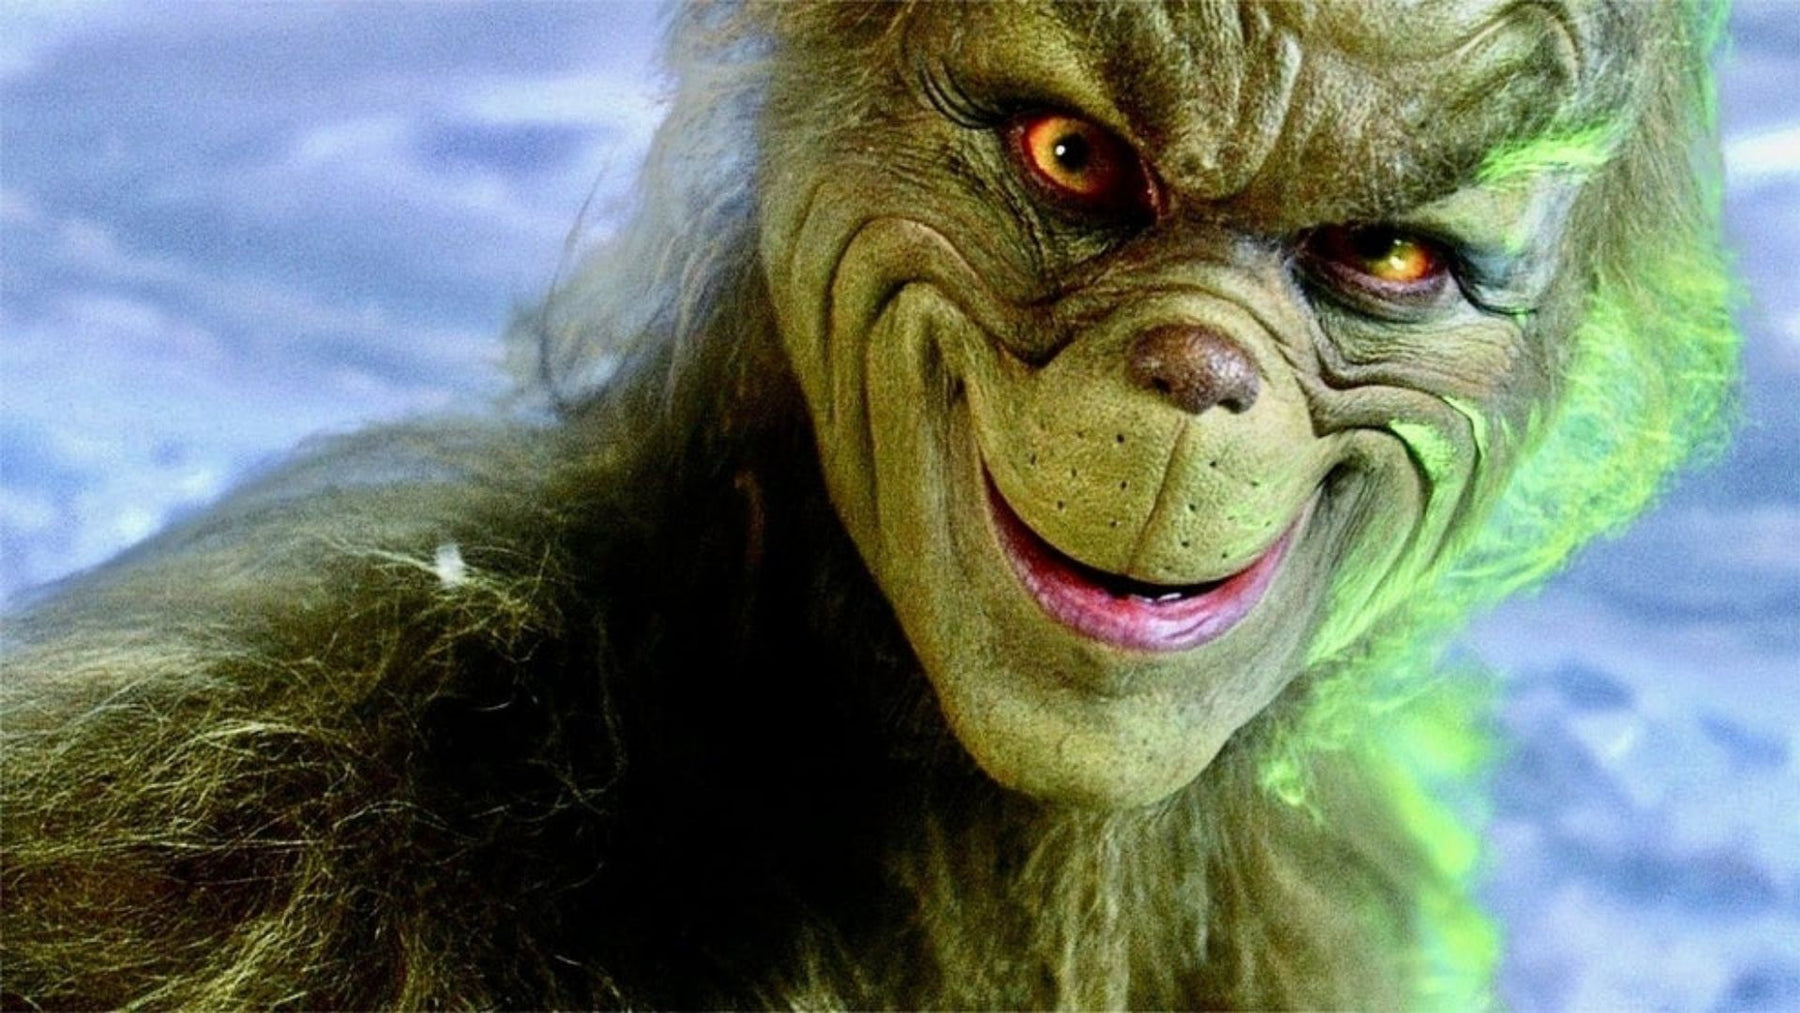 The Grinch Who Stole Christmas cheeky smile